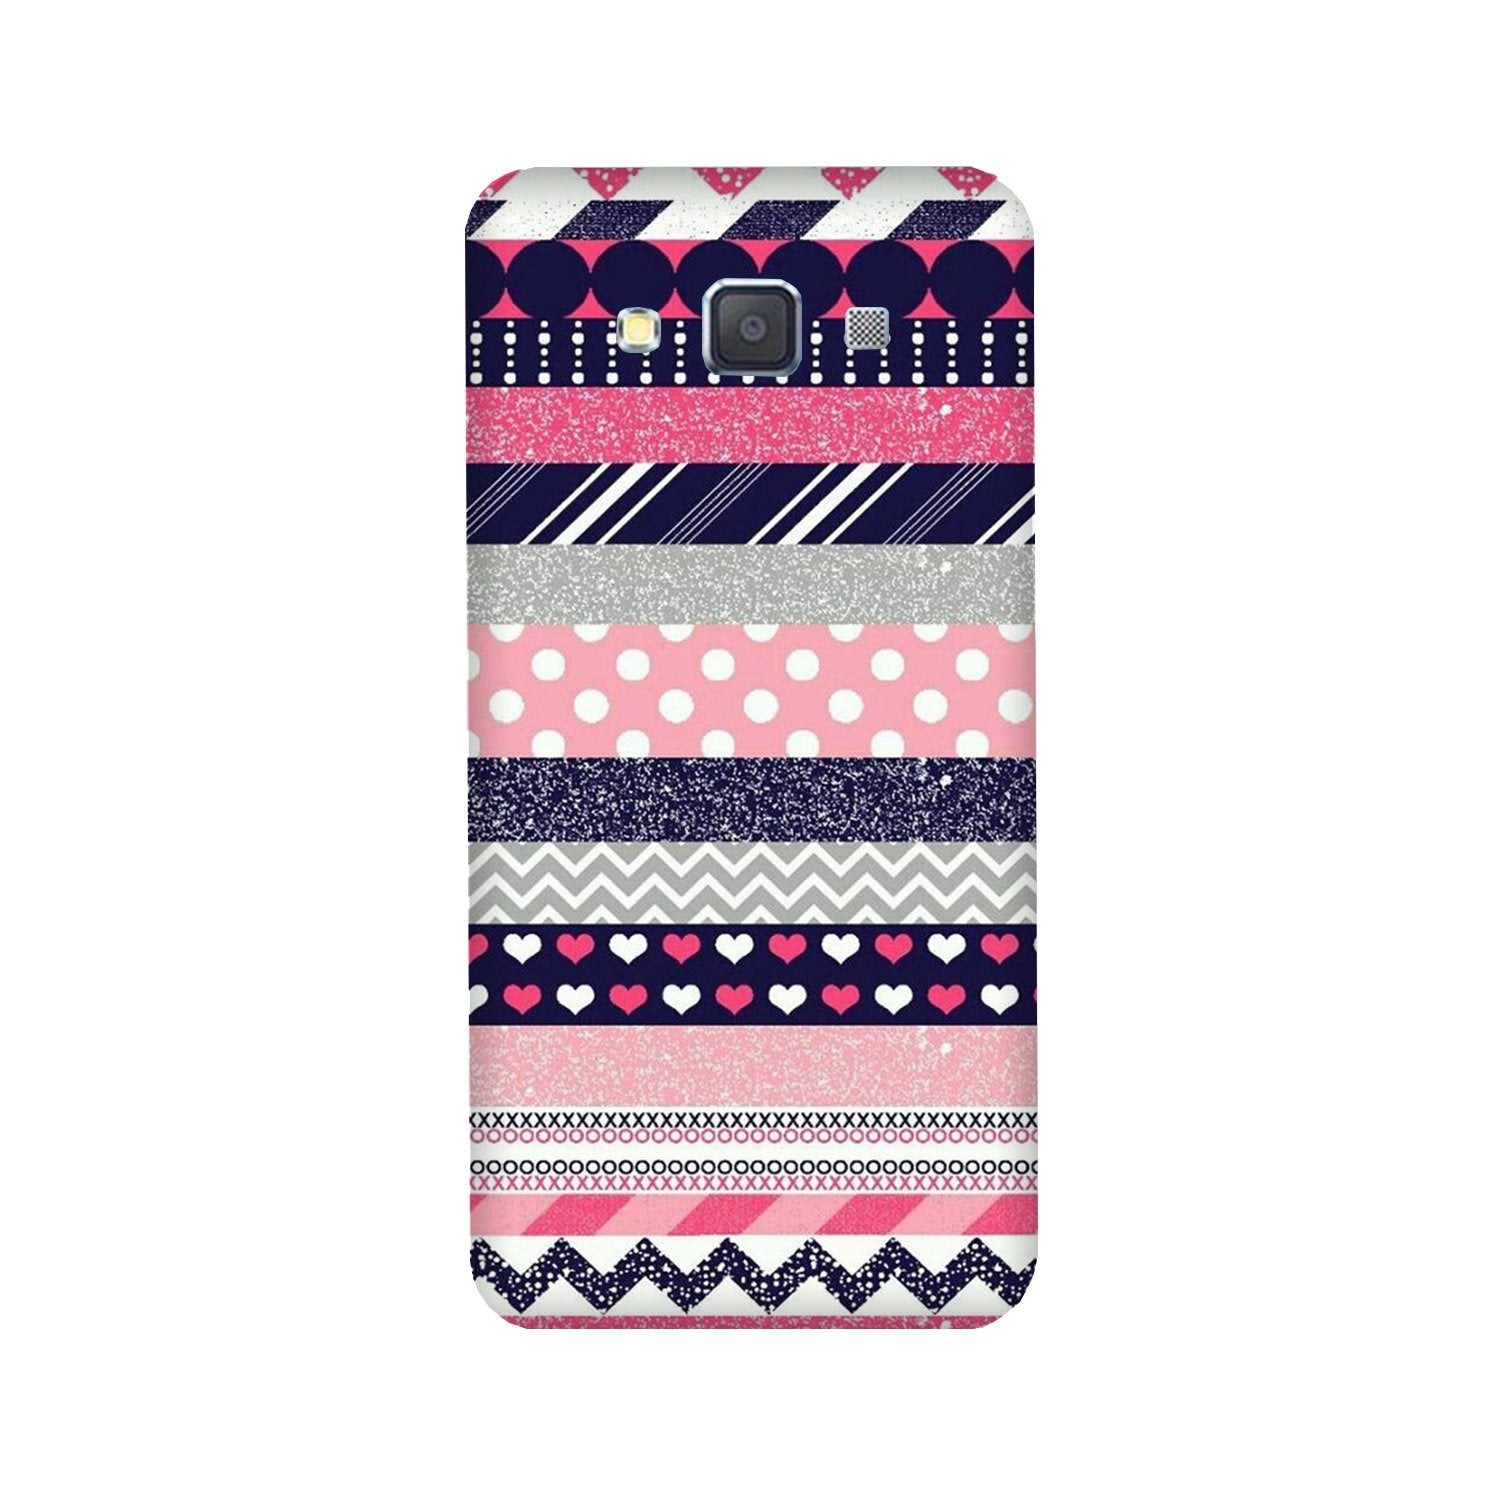 Pattern3 Case for Galaxy Grand 2